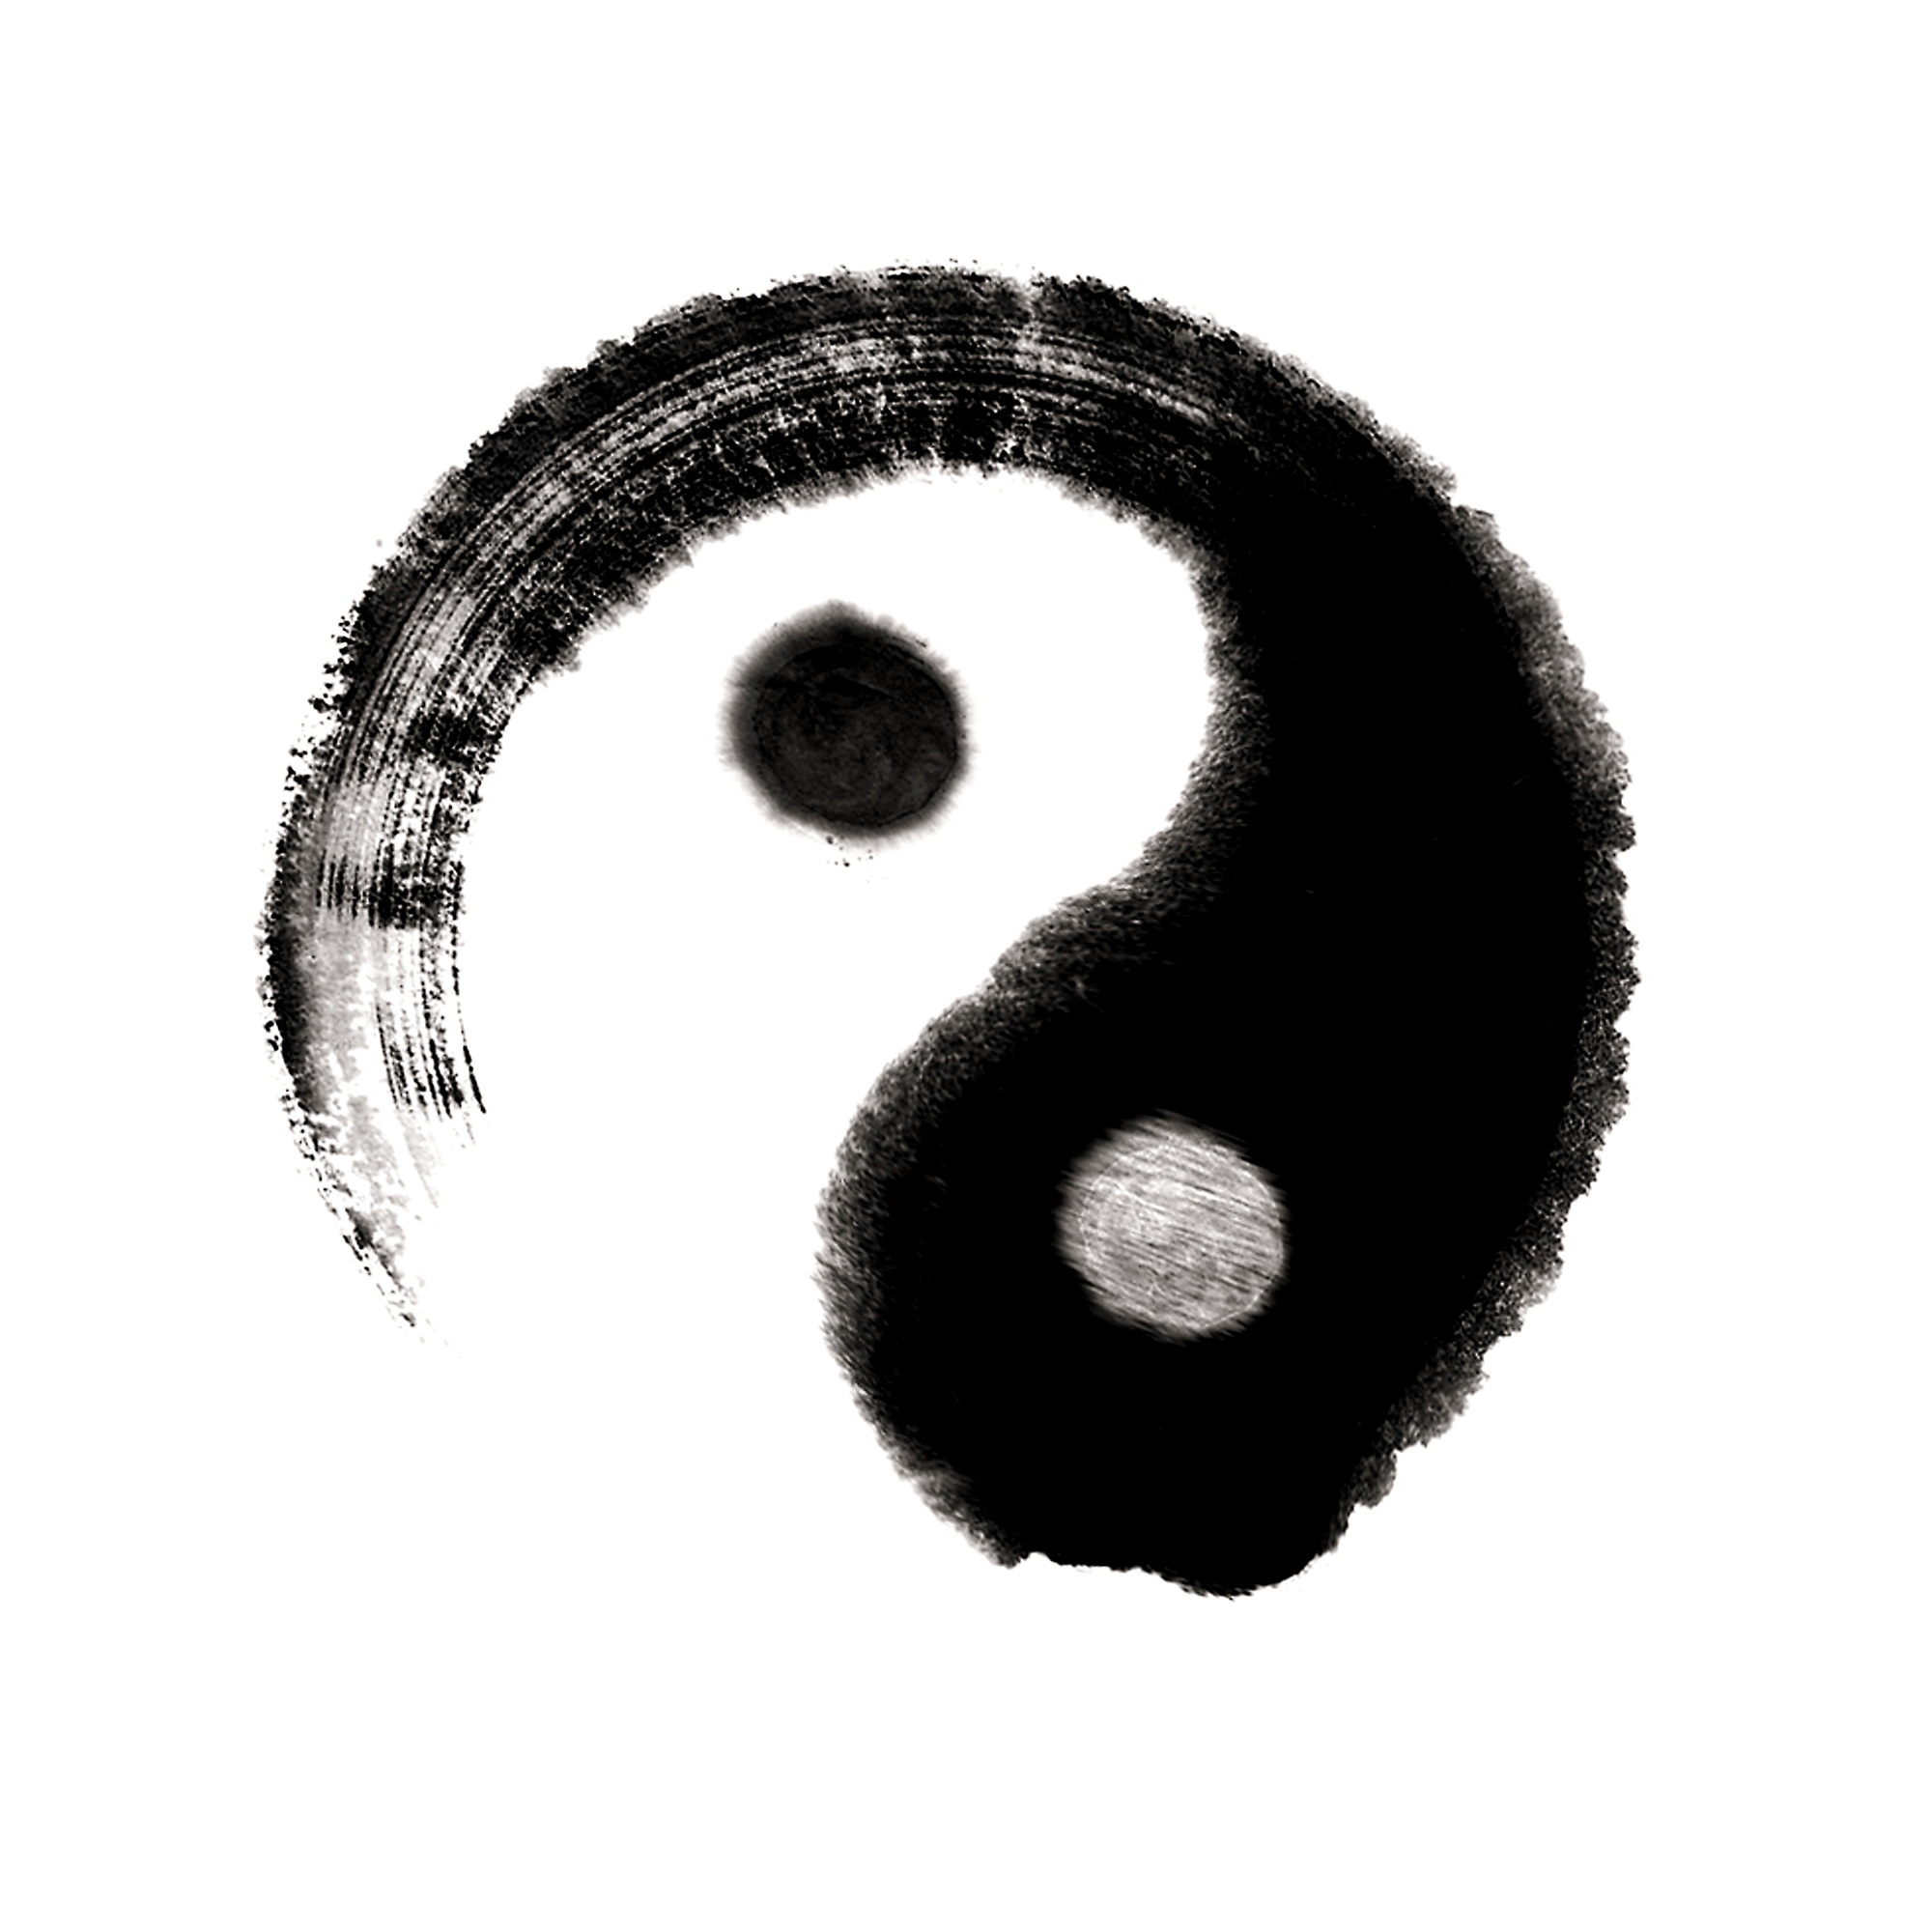 The well-known symbol of the juxtaposed Yin and Yang, forever entwined.